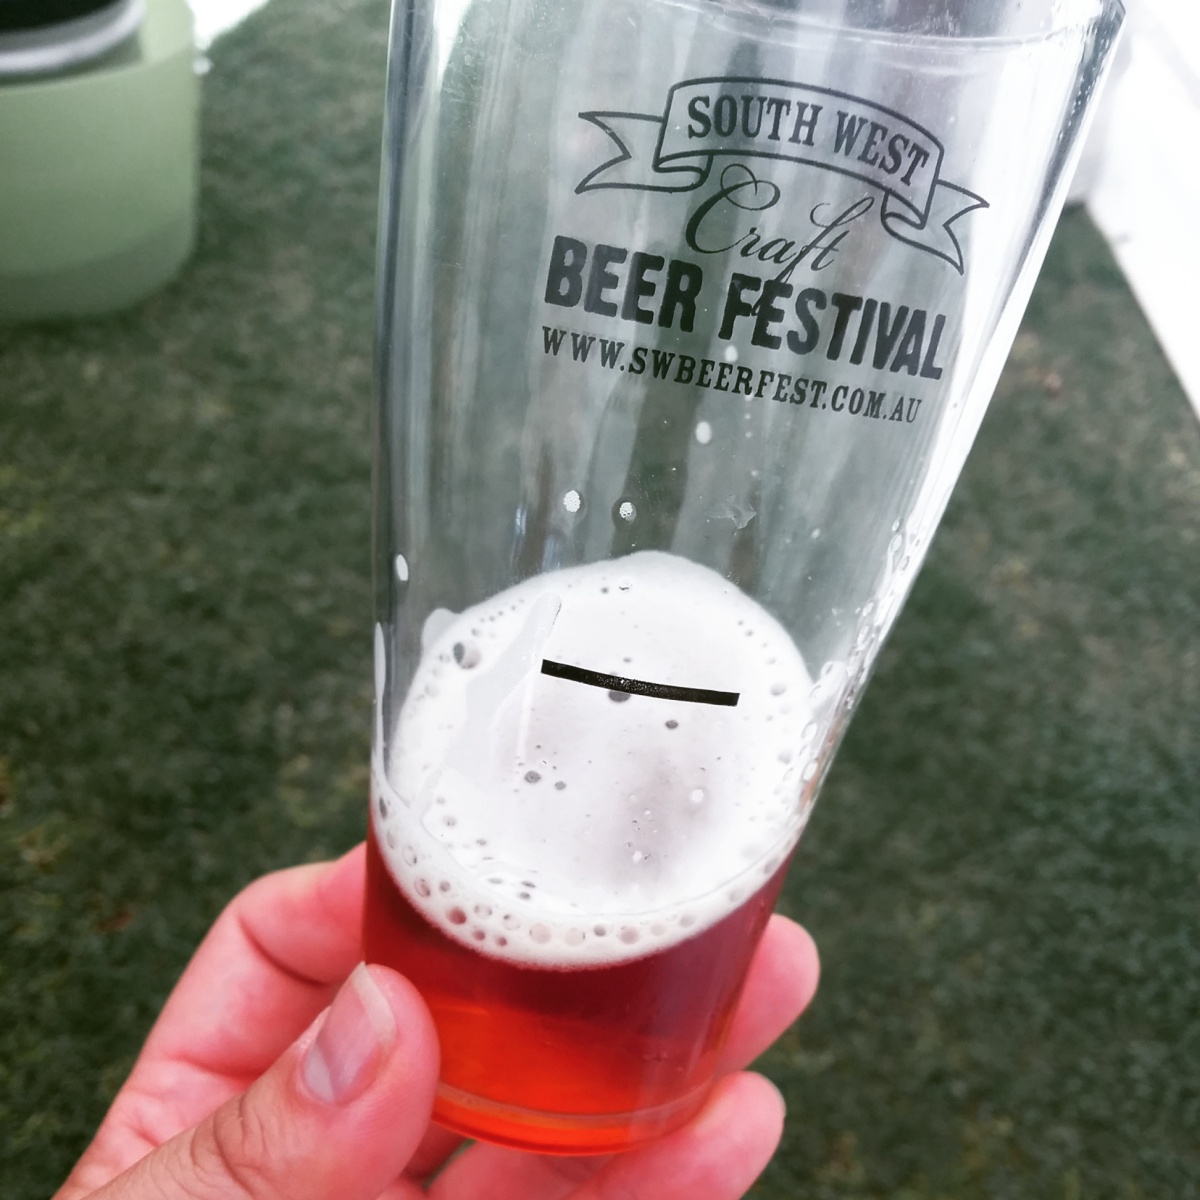 South West Craft Beer Festival 2015